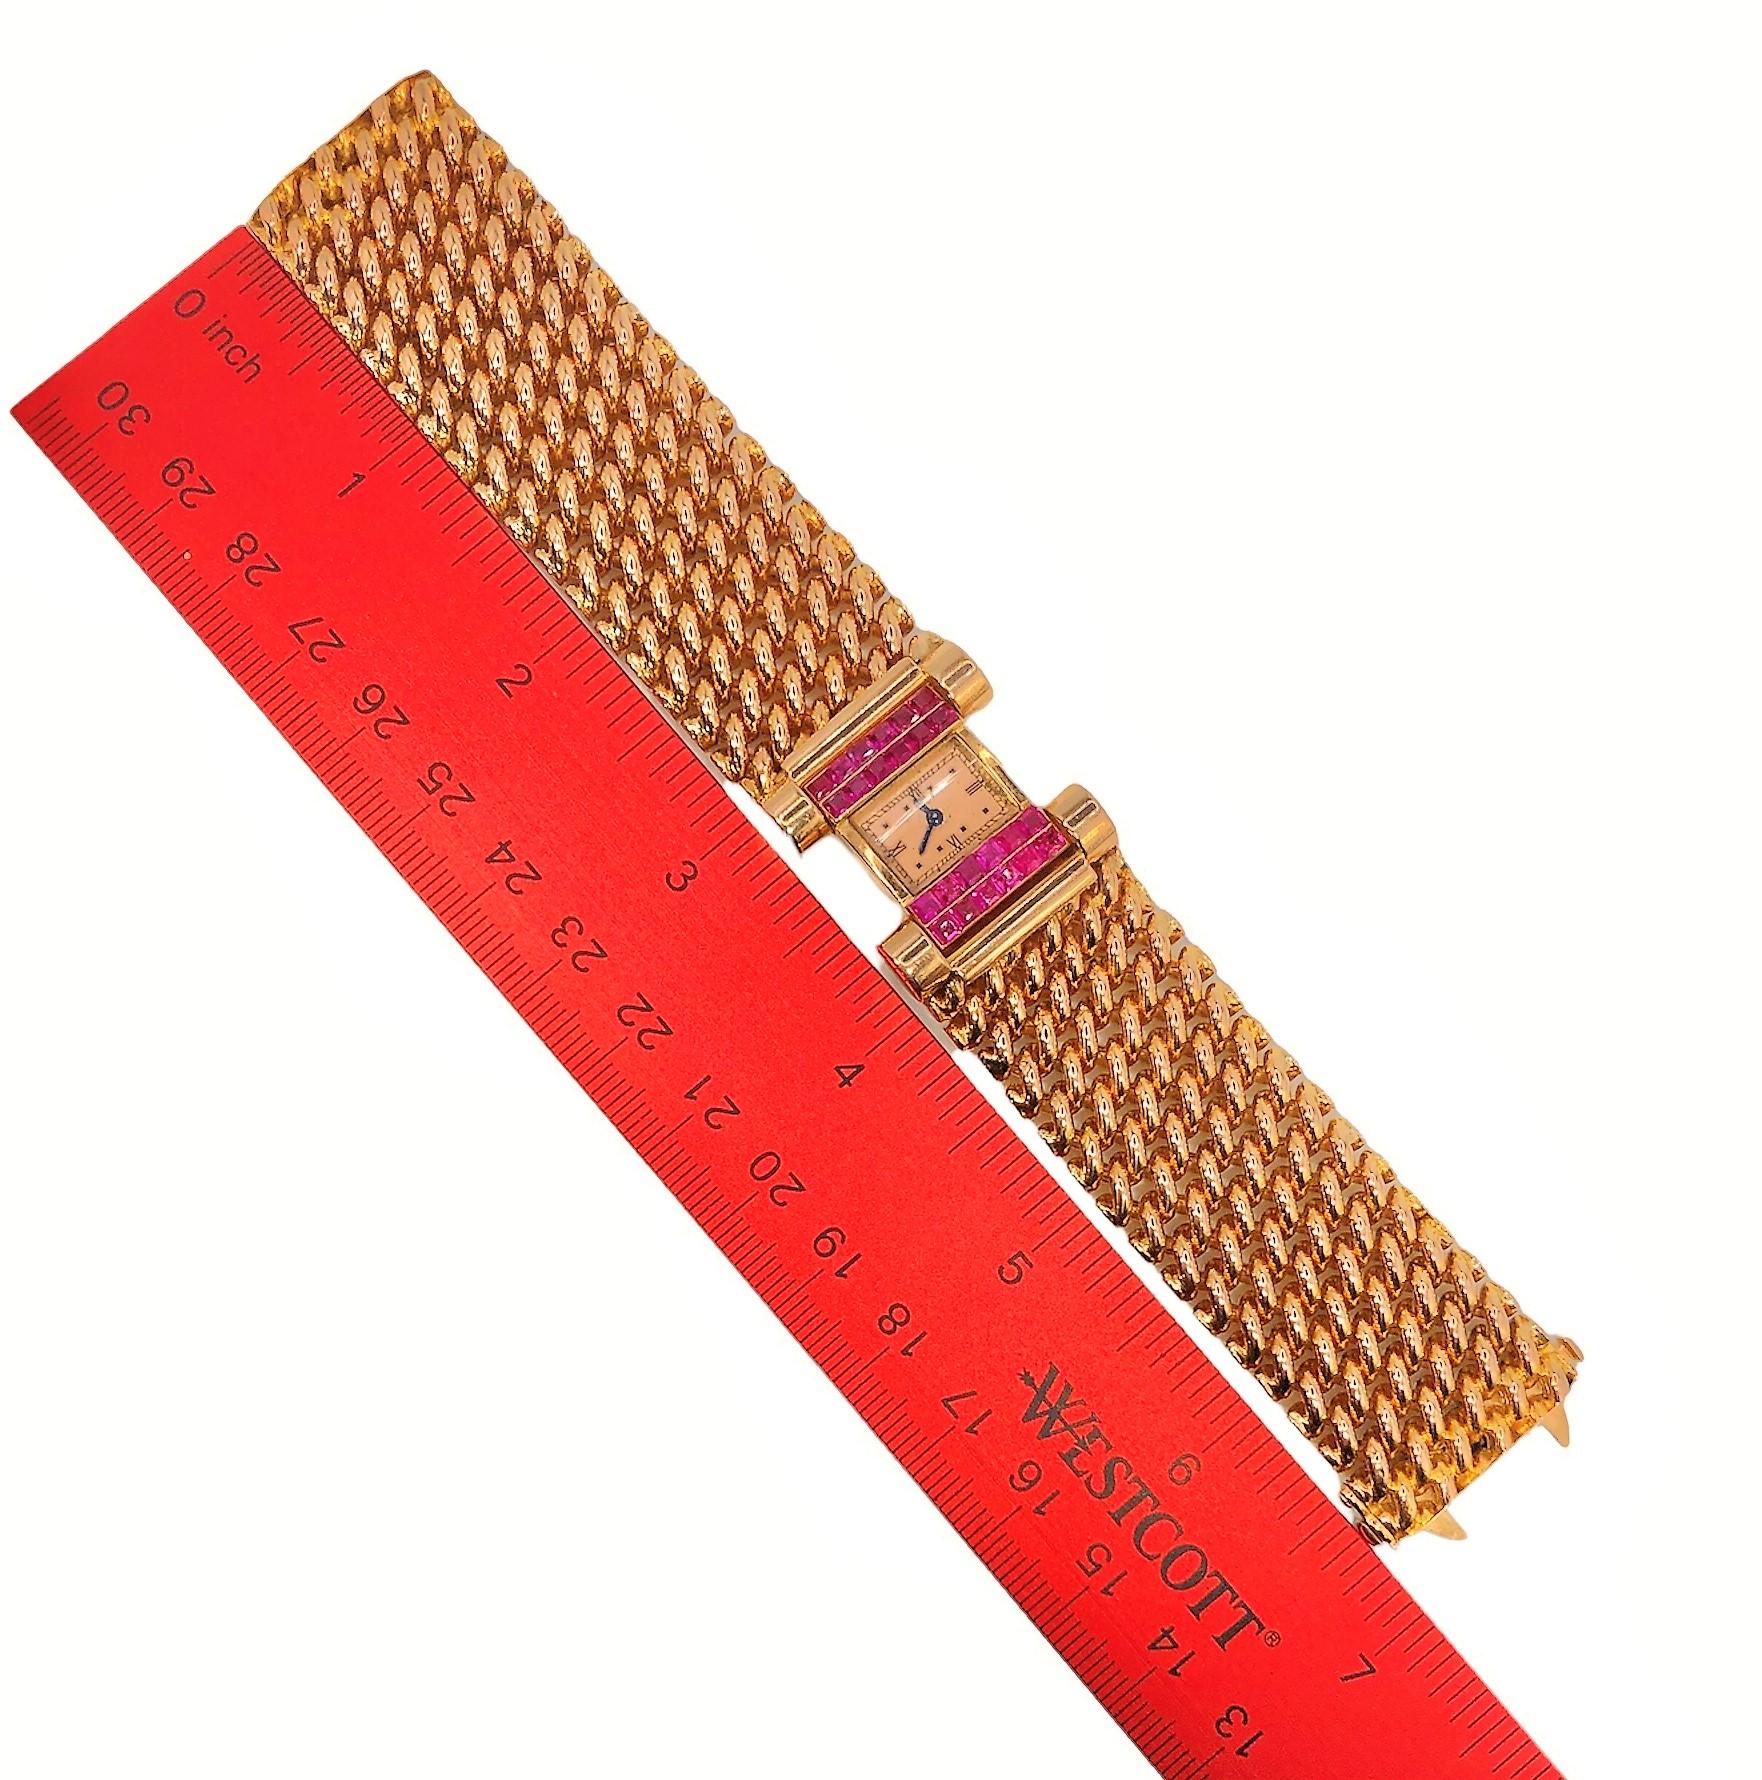 Square Cut Retro Period Jaeger LeCoultre Ladies Wrist Watch in 18k Pink Gold with Rubies For Sale